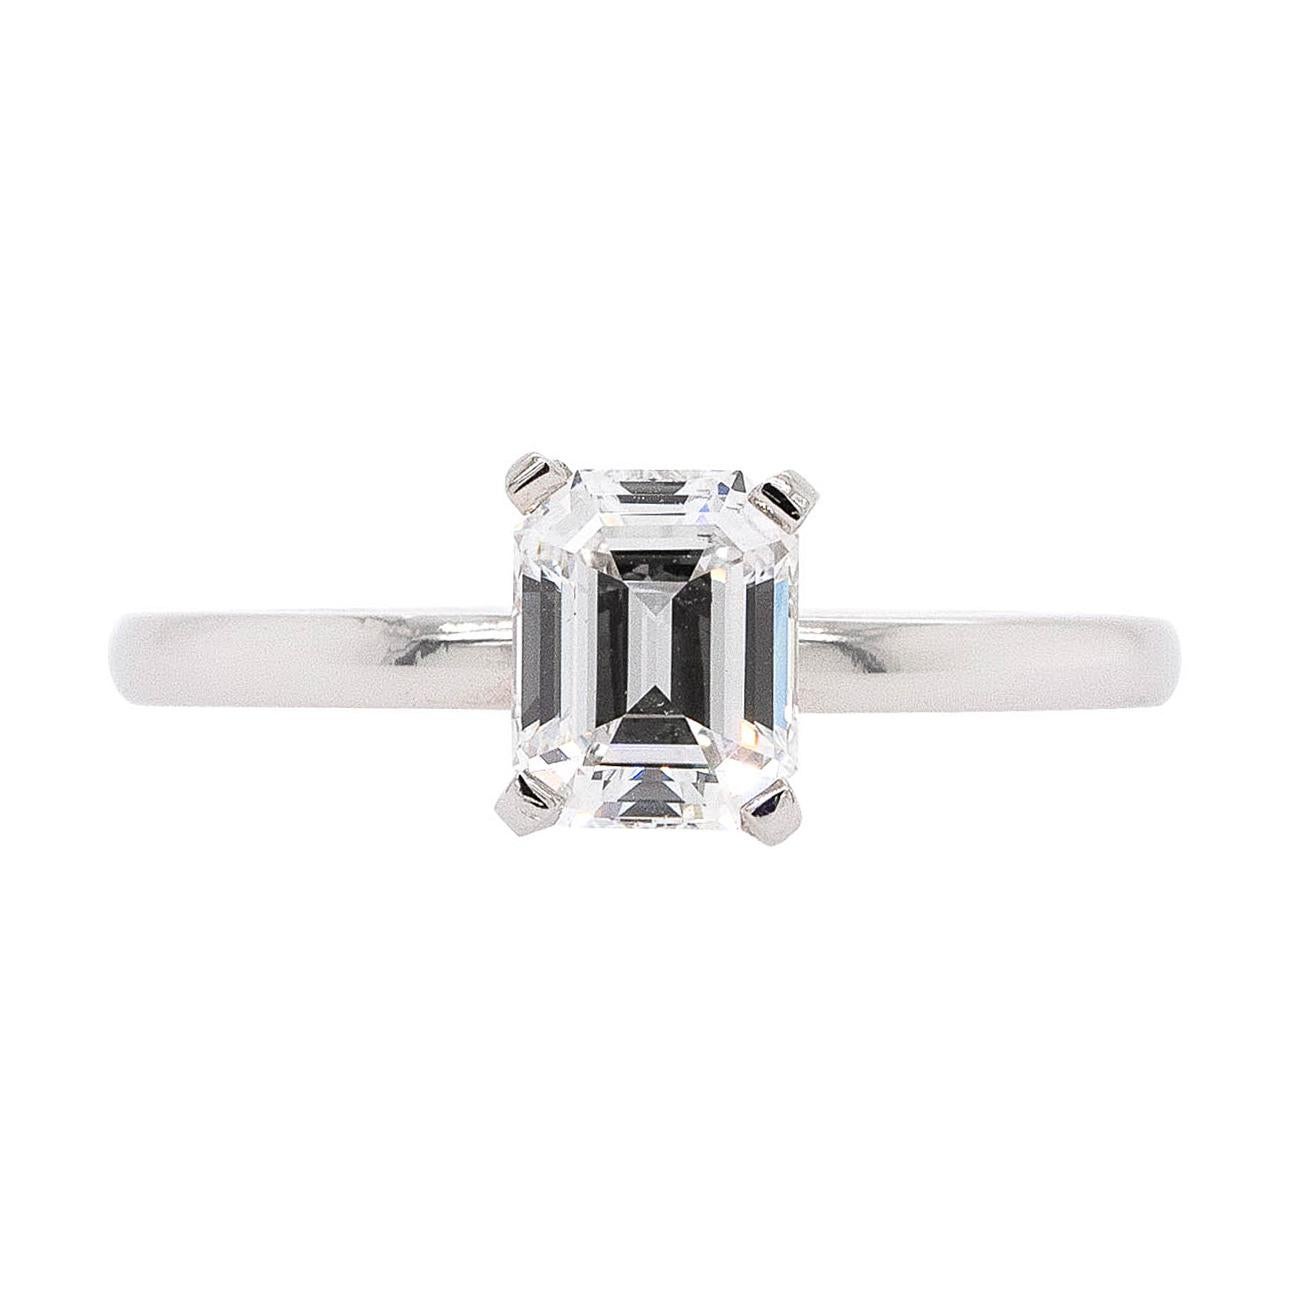 Center Details: 
1.12ct Natural GIA Emerald Cut Diamond that is D in color and VS2 in clarity
GIA Report # 6213072127
6.78 x 5.37 x 3.63 mm
Polish: Very Good
Symmetry: Very Good
Fluorescence: None

Ring Material: Platinum

Ring Details: This smooth